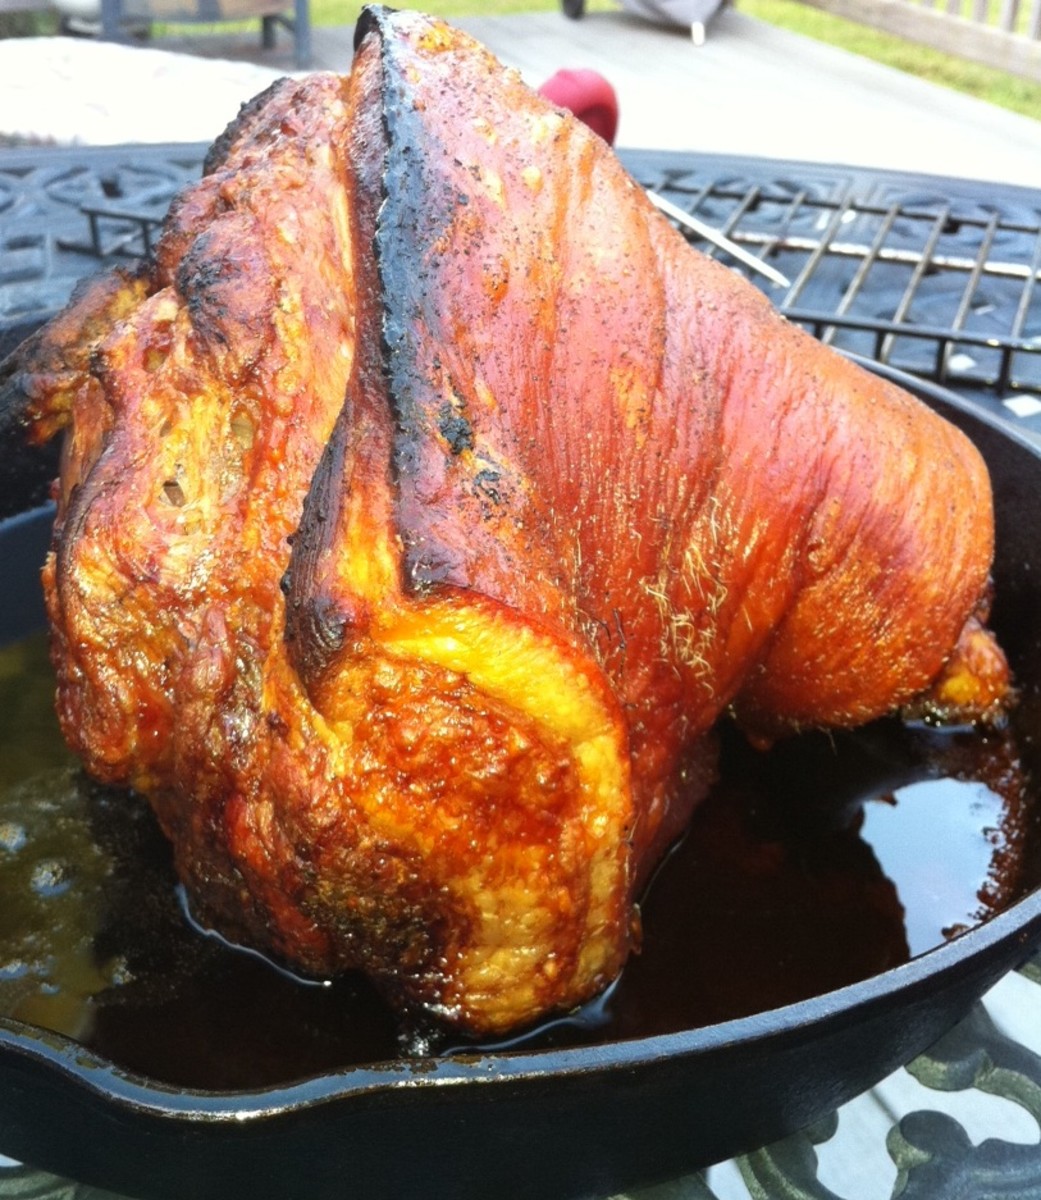 This pork shoulder was barbecued with indirect grilling.